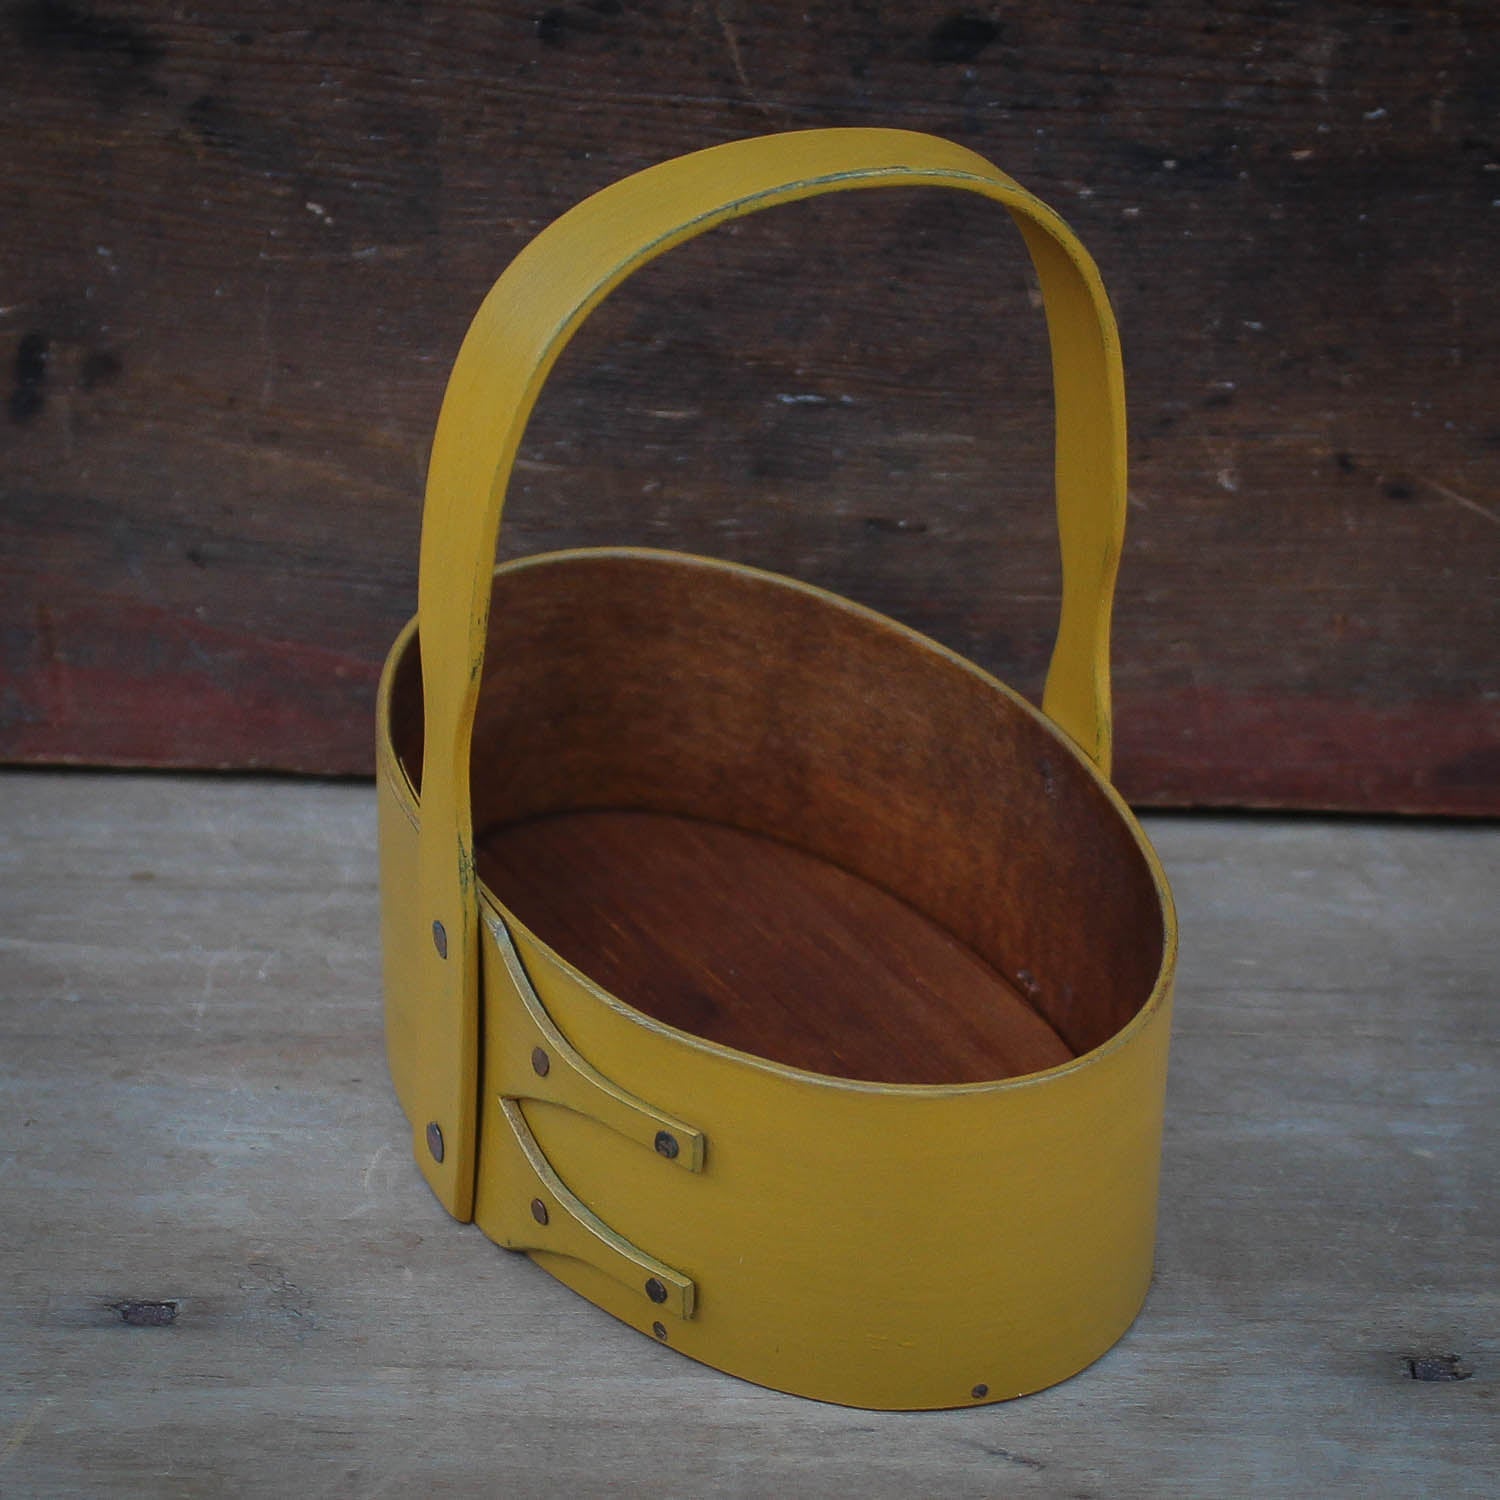 Shaker Carrier, Size #1, LeHays Shaker Boxes, Handcrafted in Maine.  Yellow Milk Paint Finish, Side View